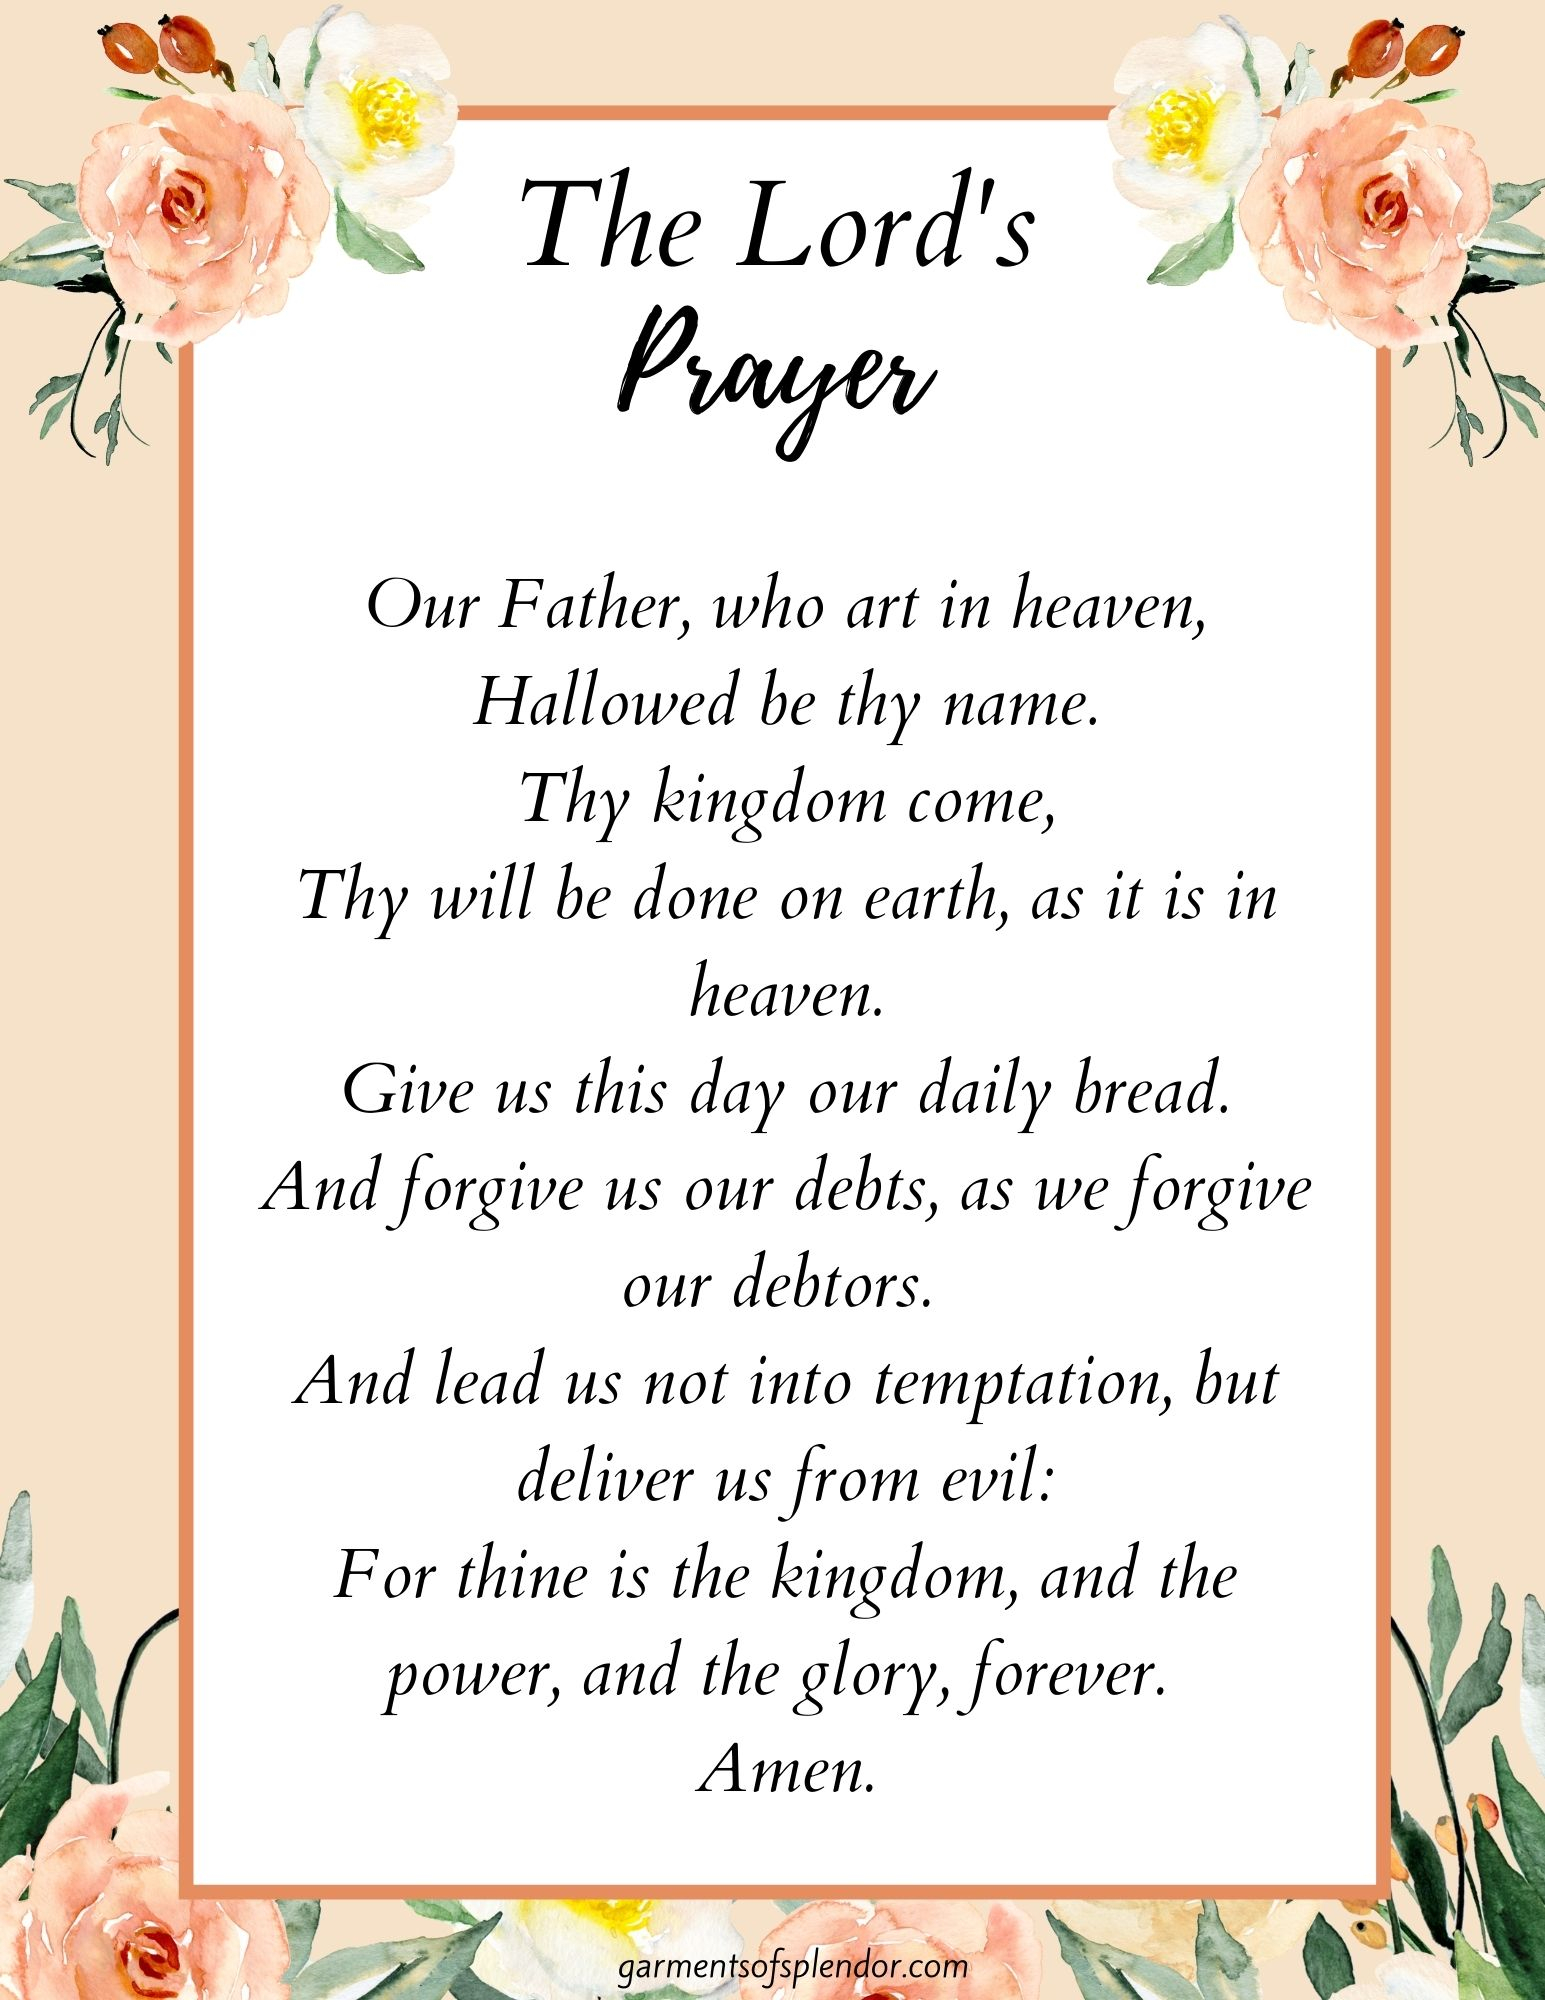 The Lords Prayer version 3 pic